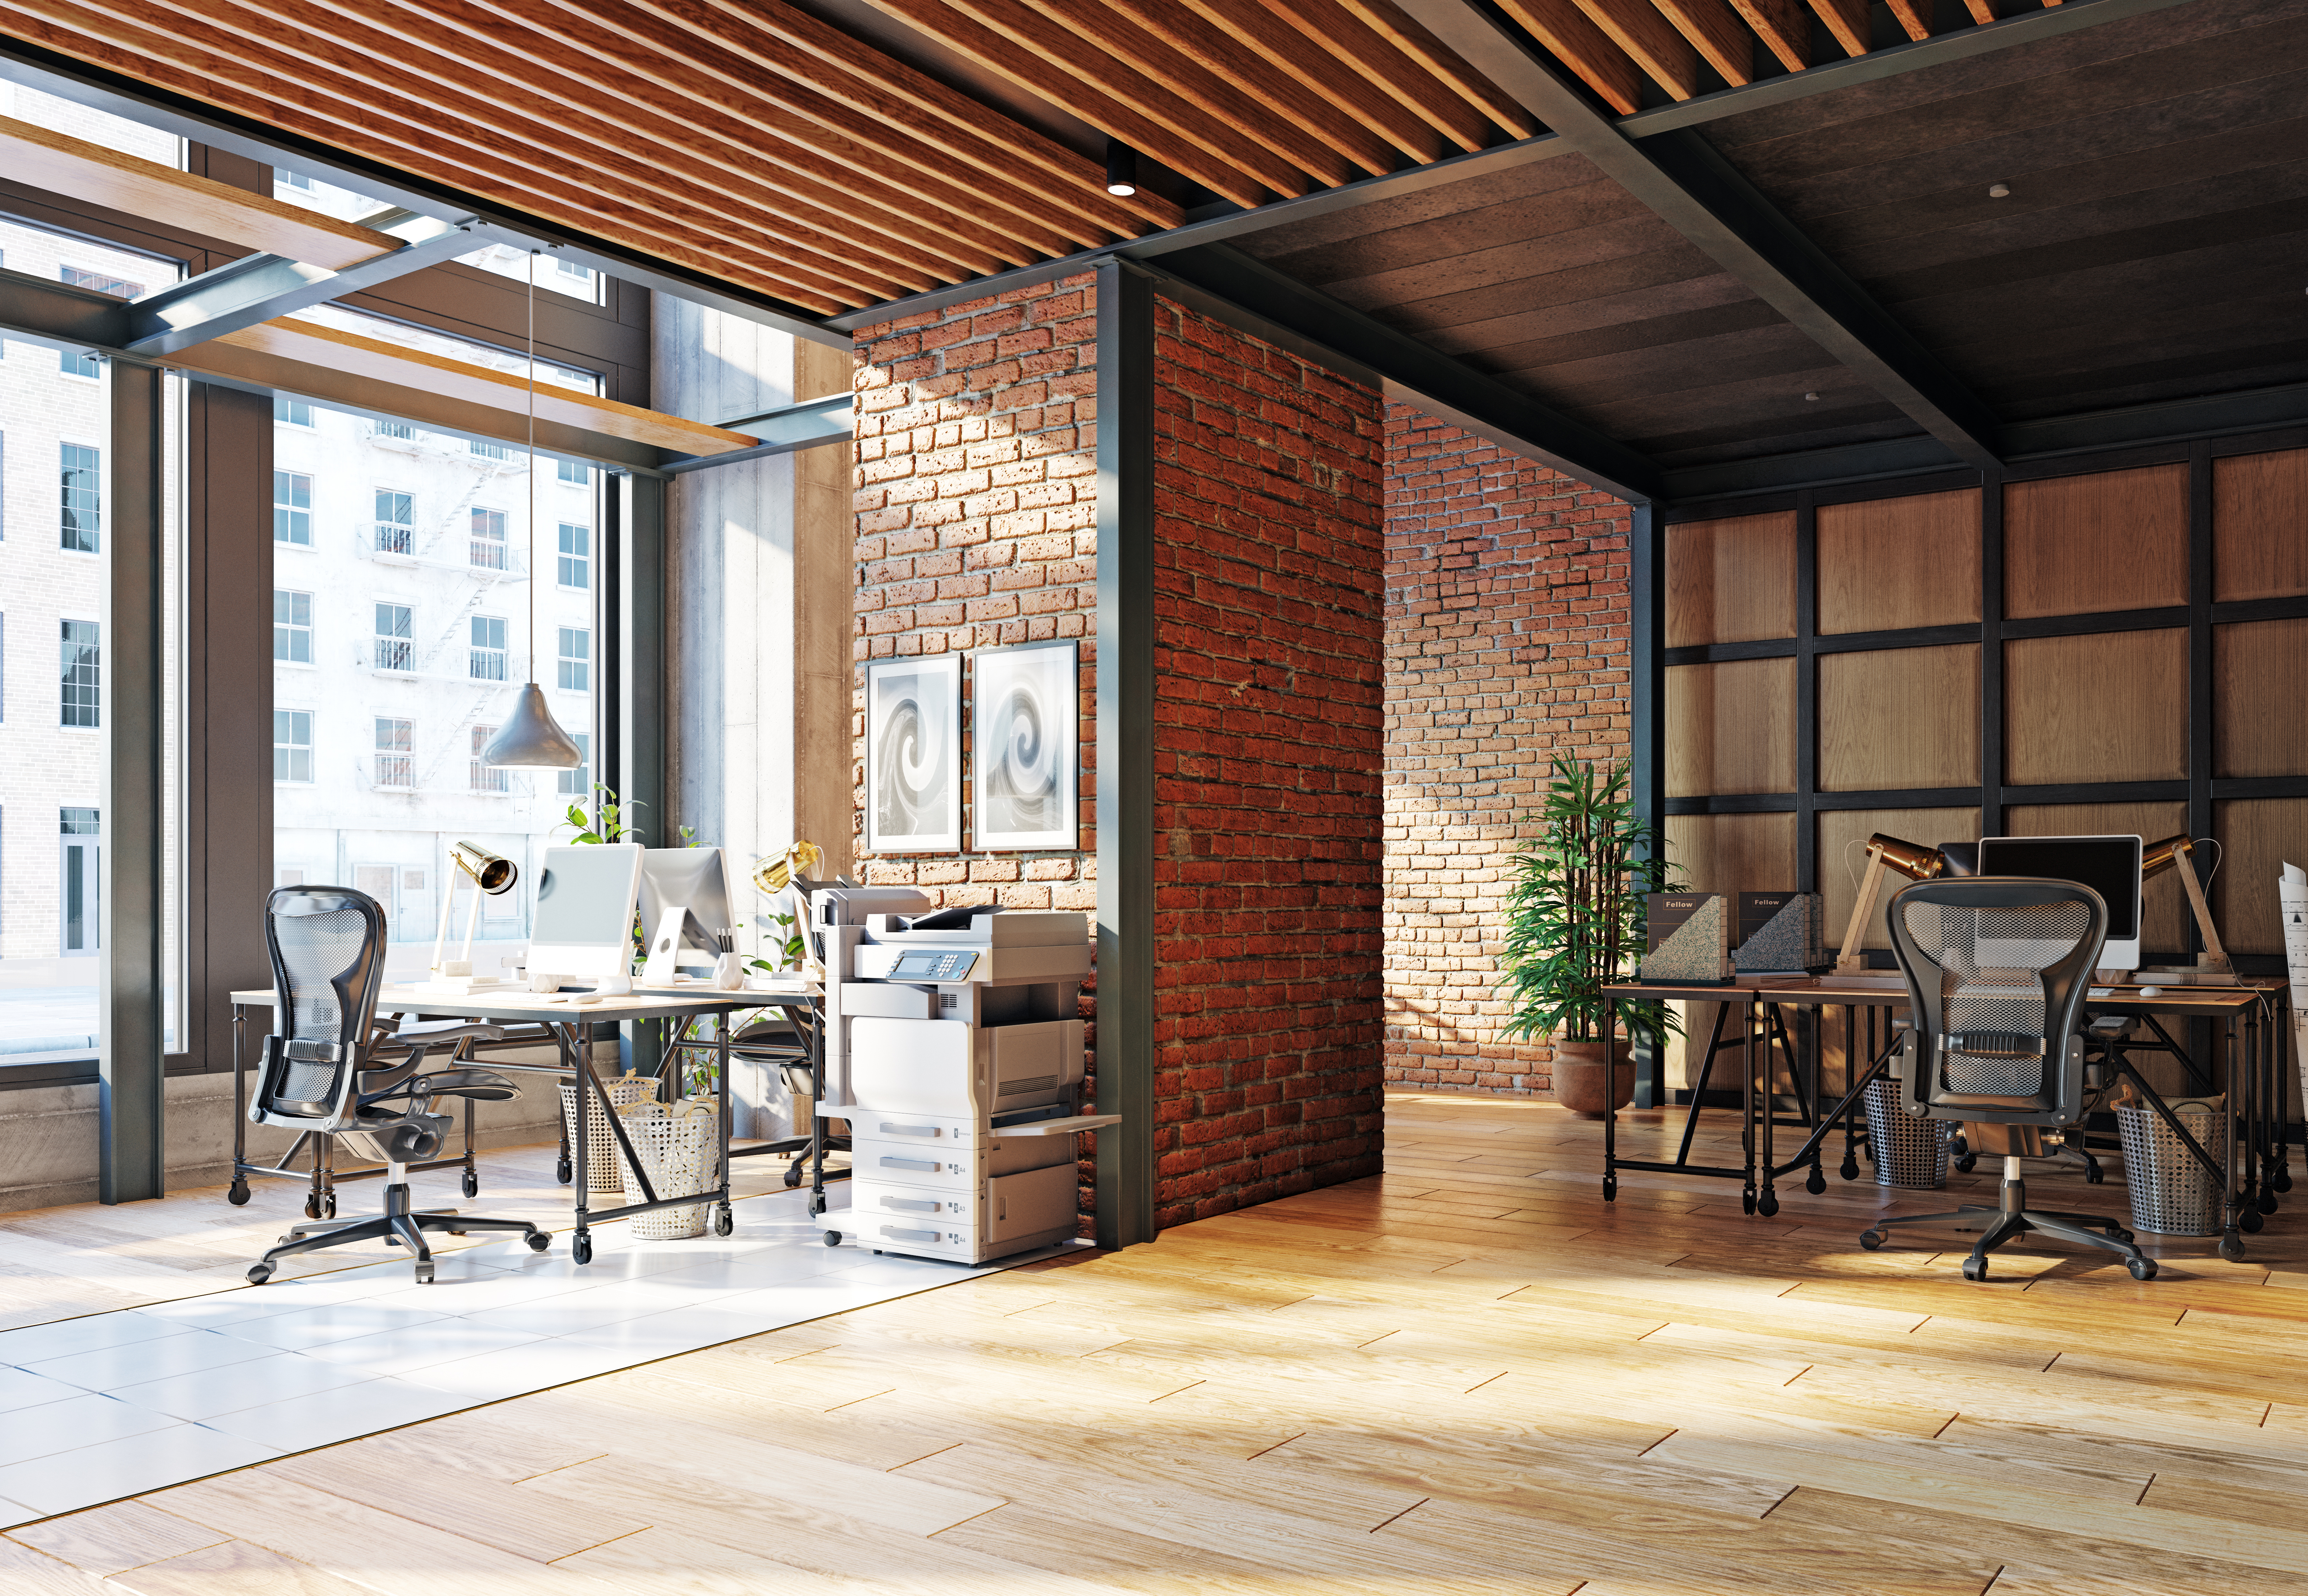 Featured image: A modern office with brick walls and wooden floors. - Relocating office premises? Our top tips for a smooth tech move.